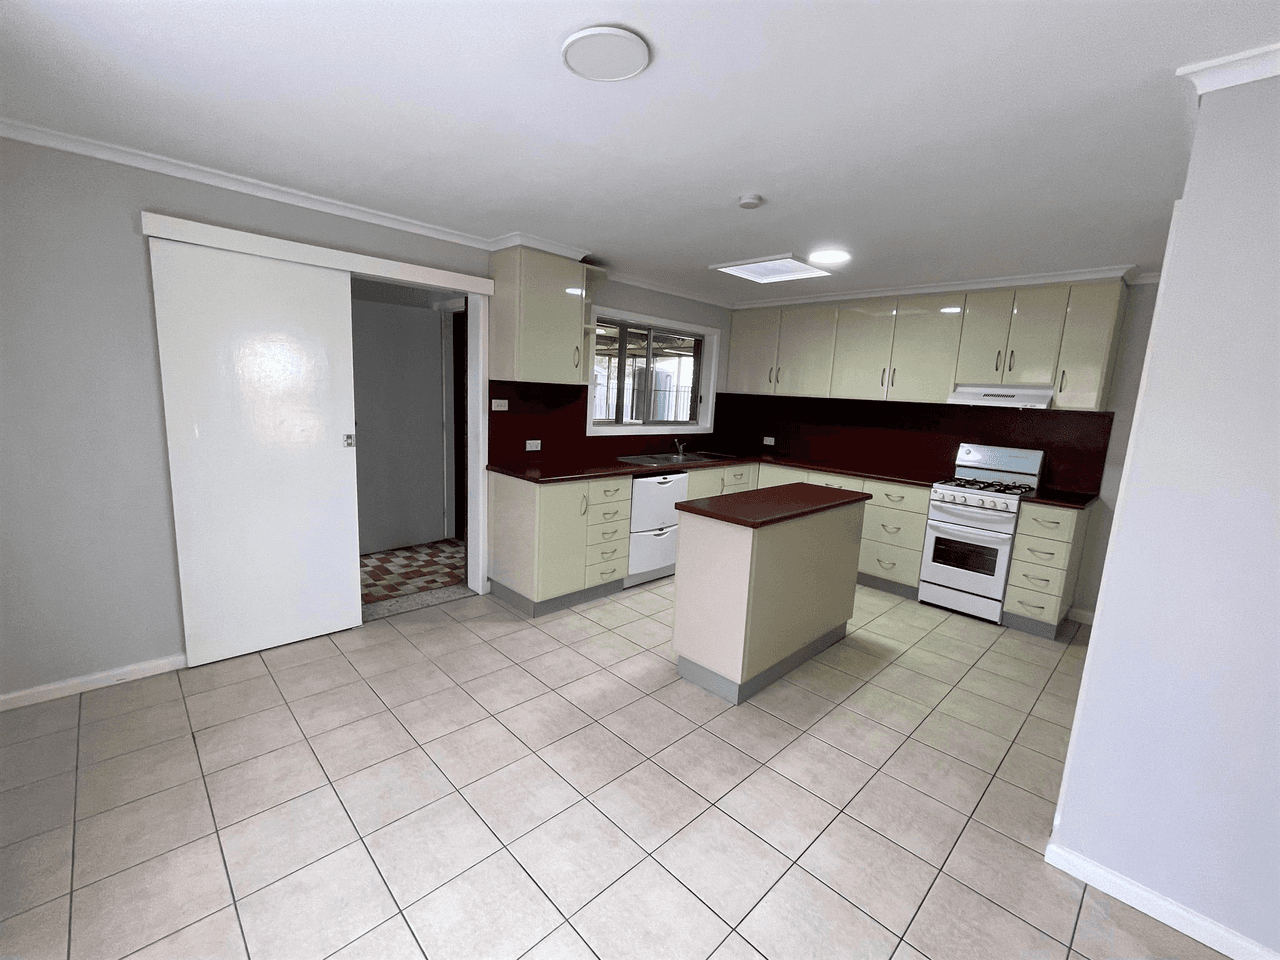 83 Erskine Road, GRIFFITH, NSW 2680